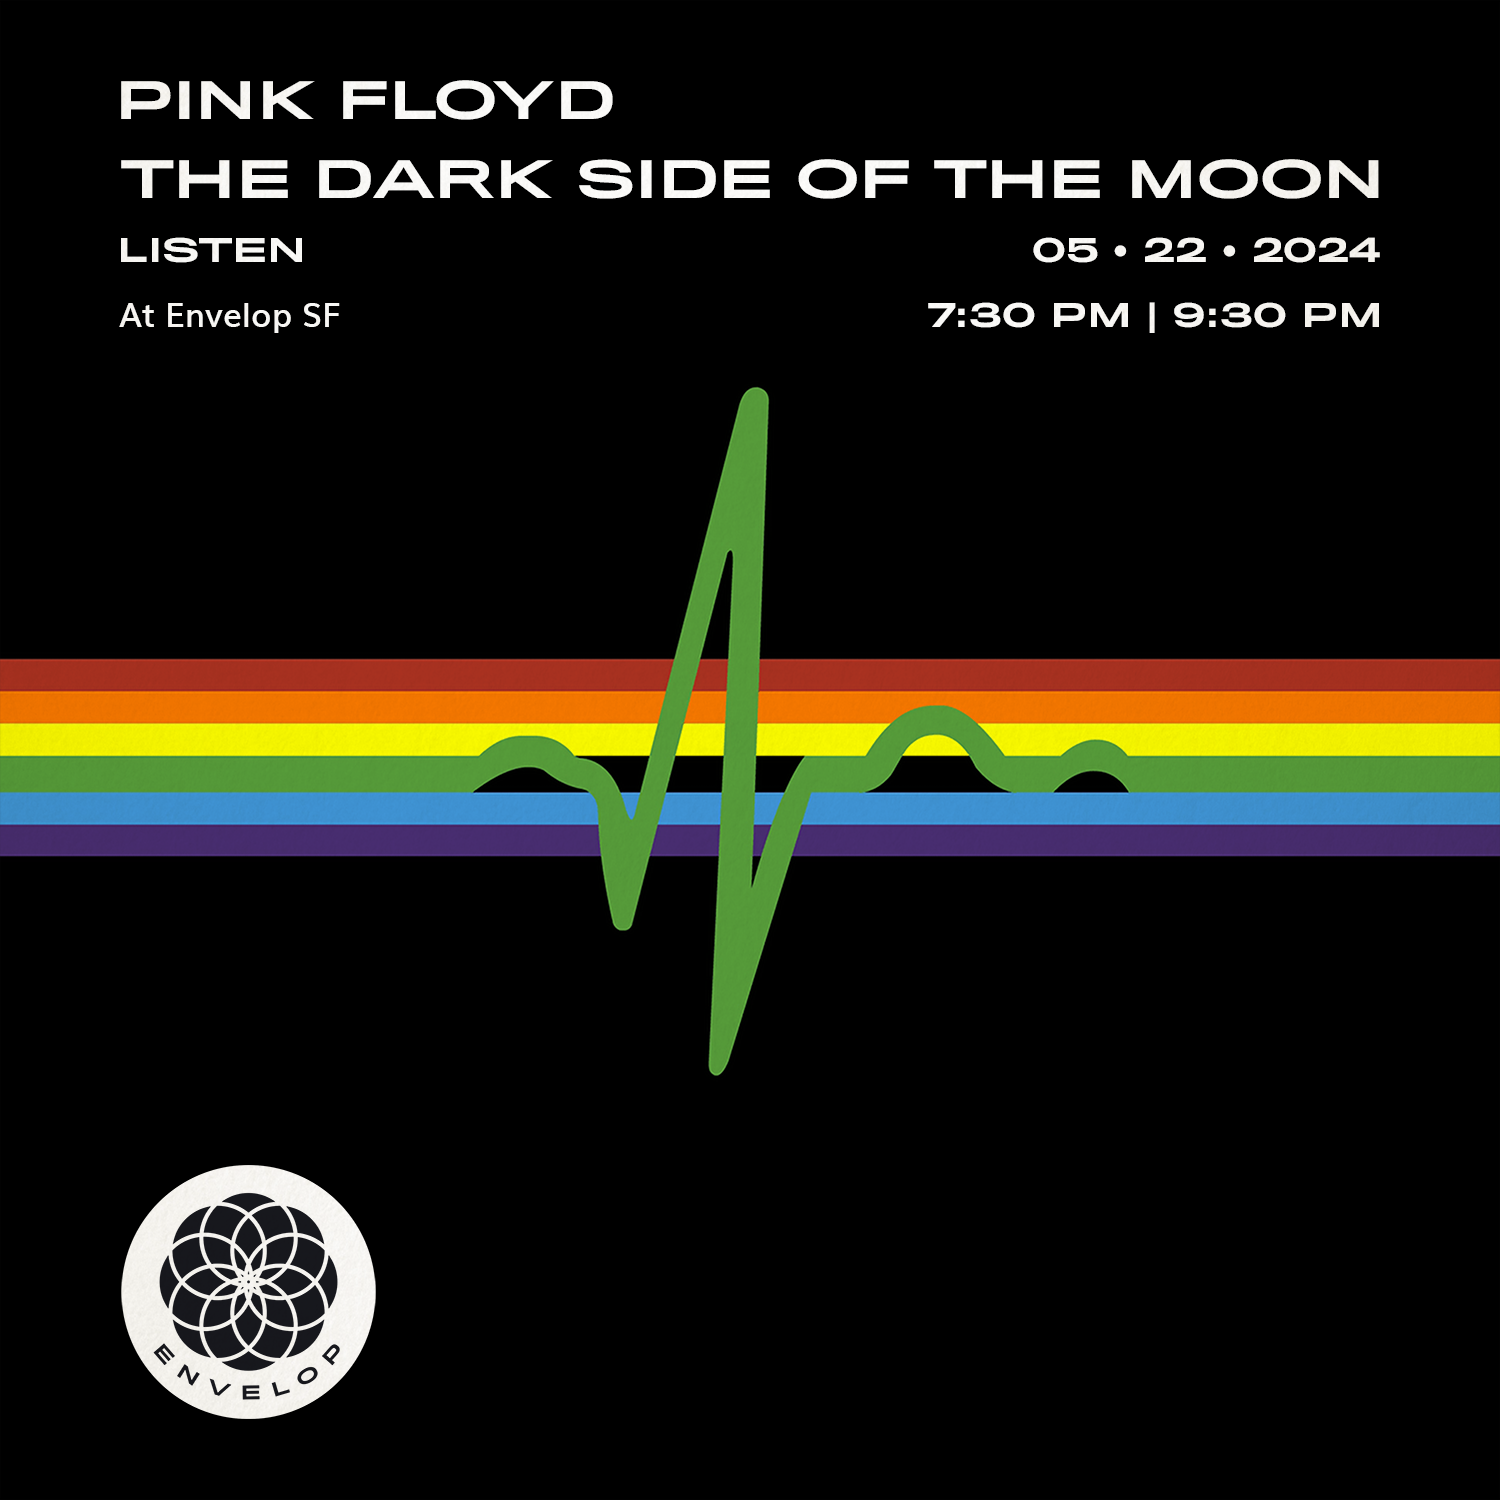 Event image for Pink Floyd - The Dark Side of the Moon: LISTEN